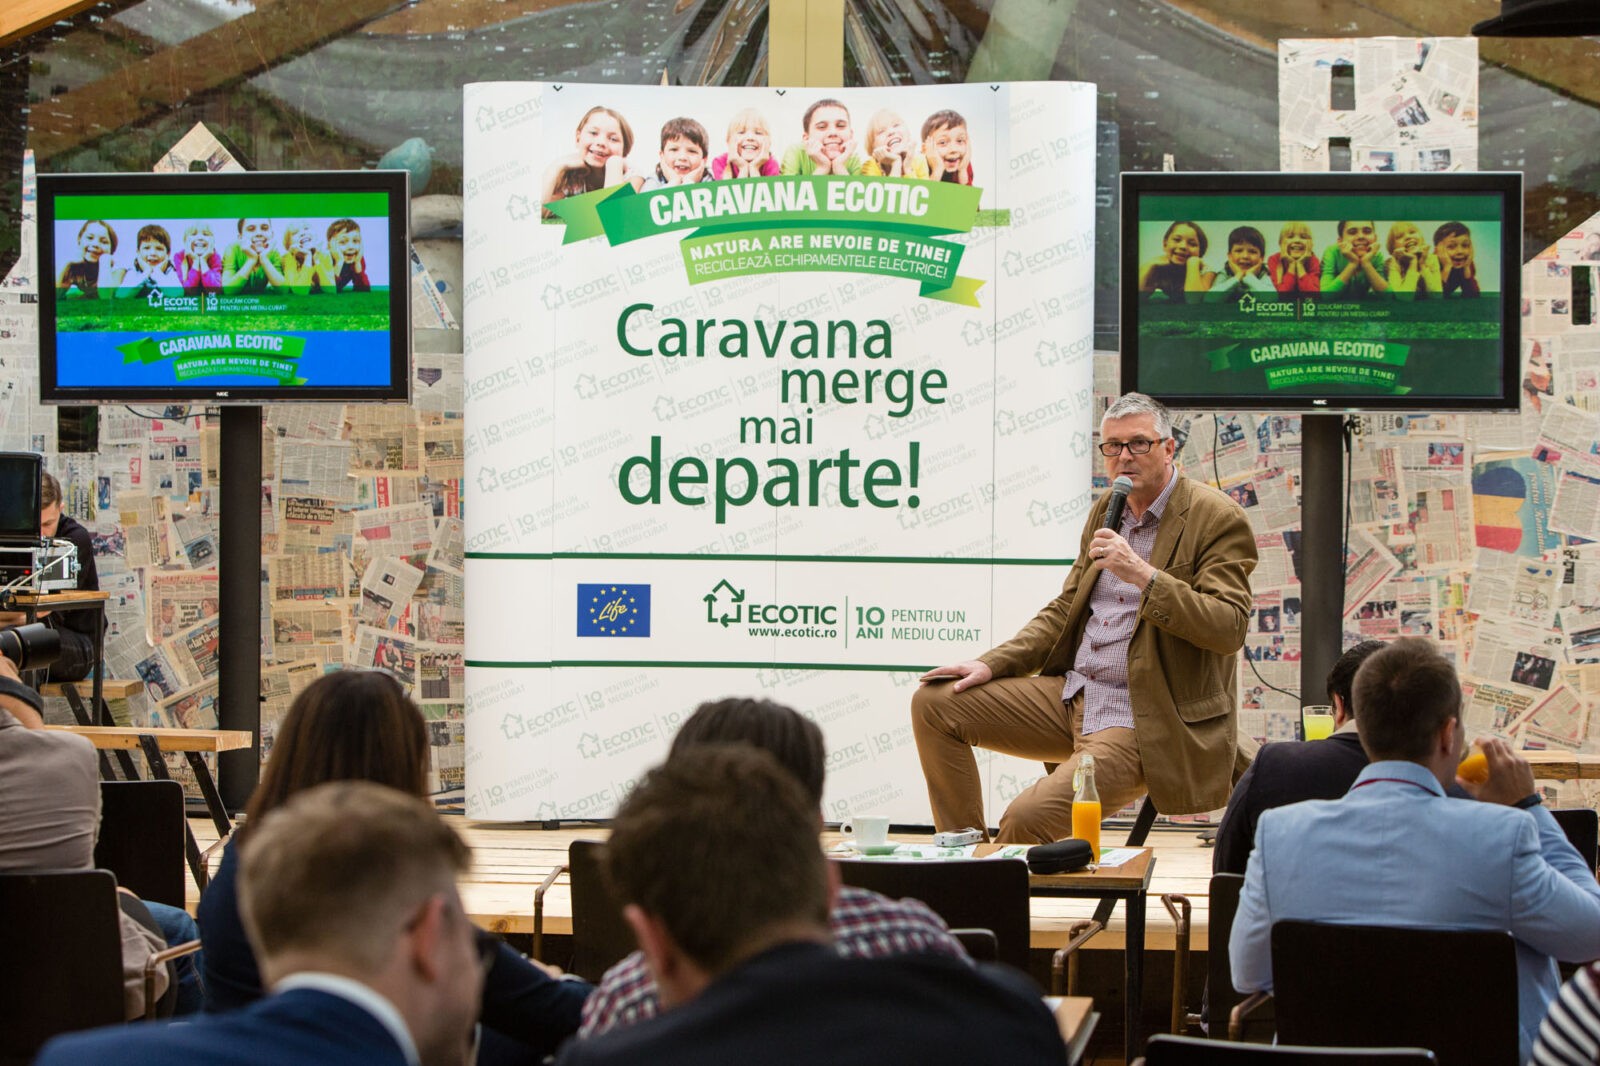 End of stage: The ECOTIC caravan goes on!